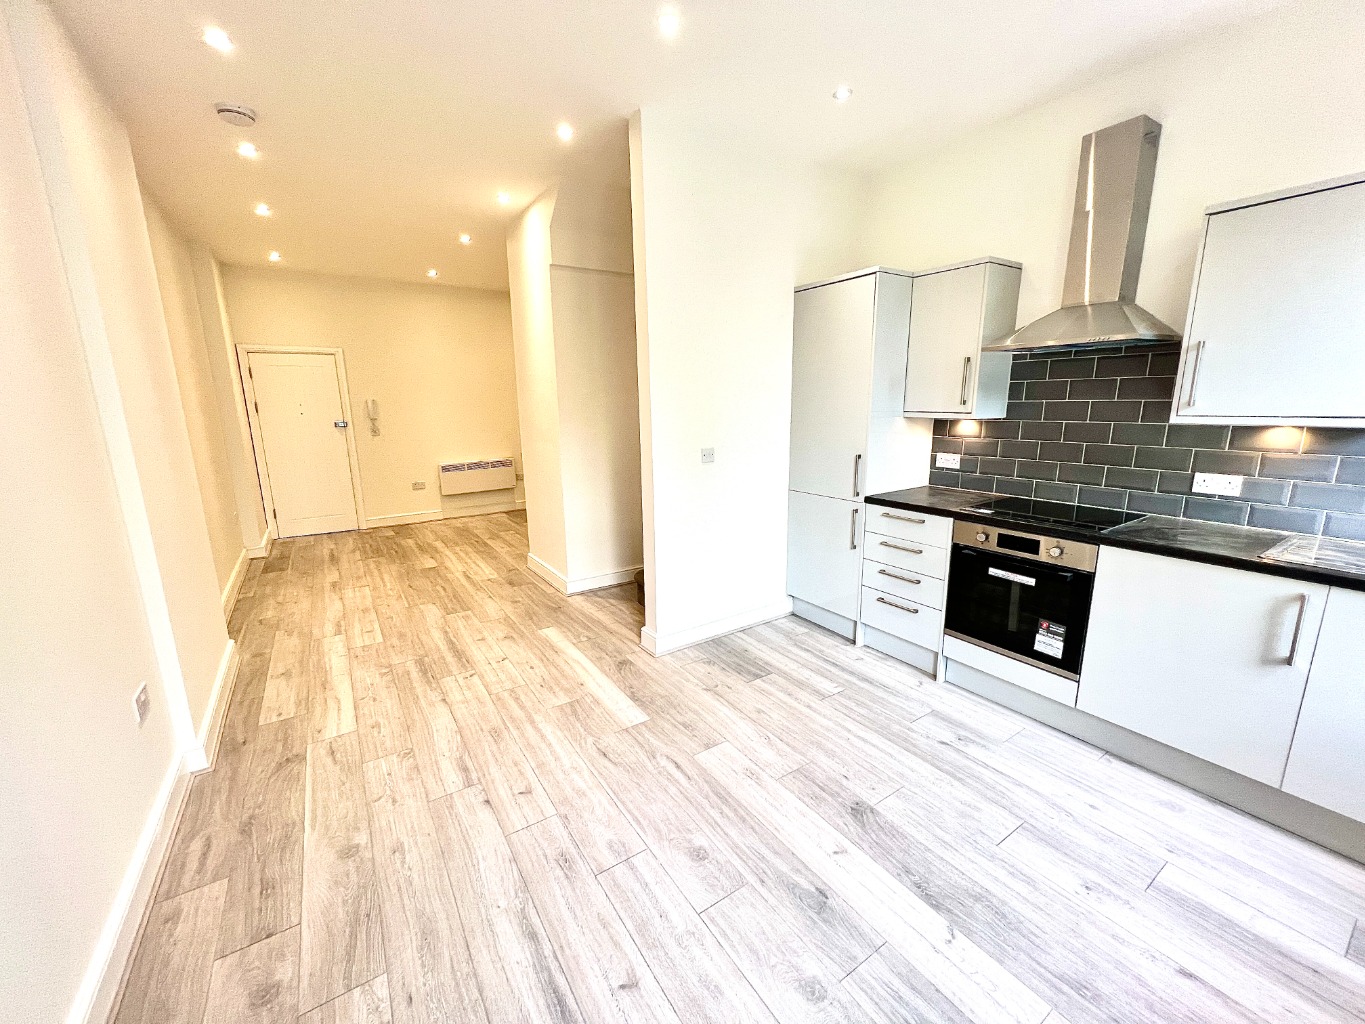 A stunning two bedroomed first floor split level flat to rent on Sidcup Road Eltham. These properties are brand new and offer a high specification throughout.